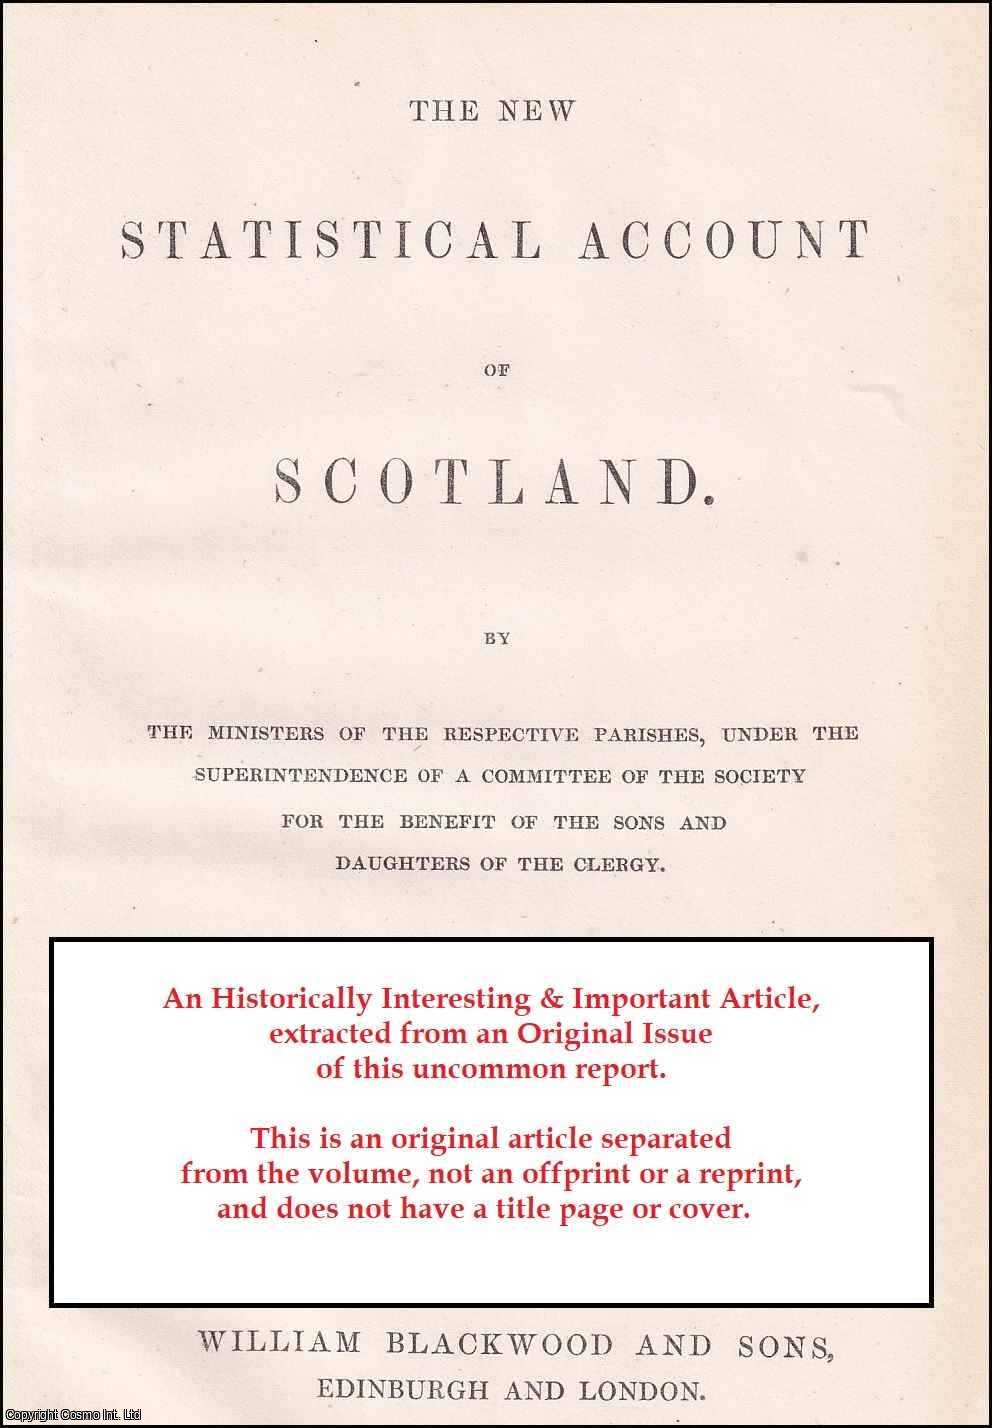 Rev. James Macfarlane - Parish of Humbie. Presbytery of Haddington, Synod of Lothian and Tweeddale. An uncommon original article from The New Statistical Account of Scotland, 1845.